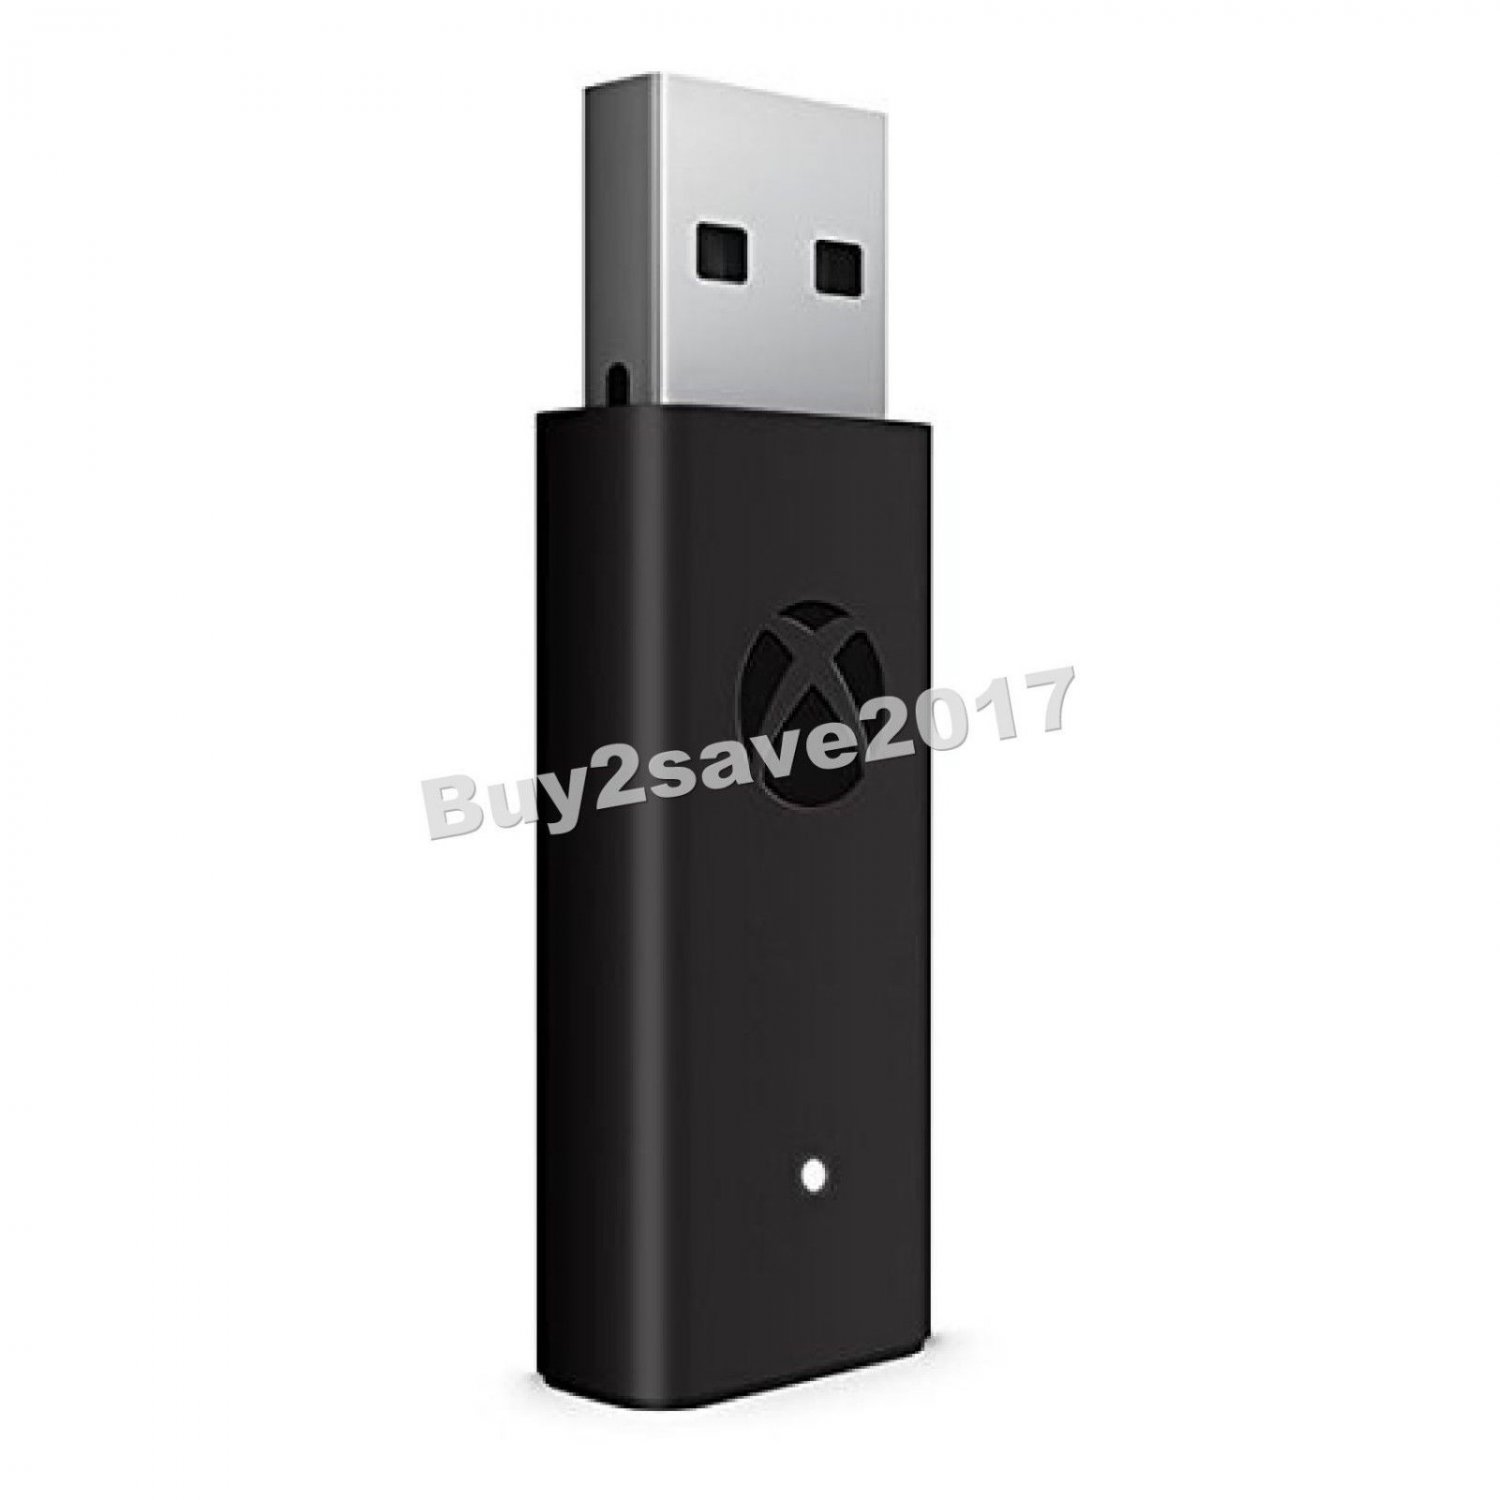 xbox wireless adapter for windows 10 driver